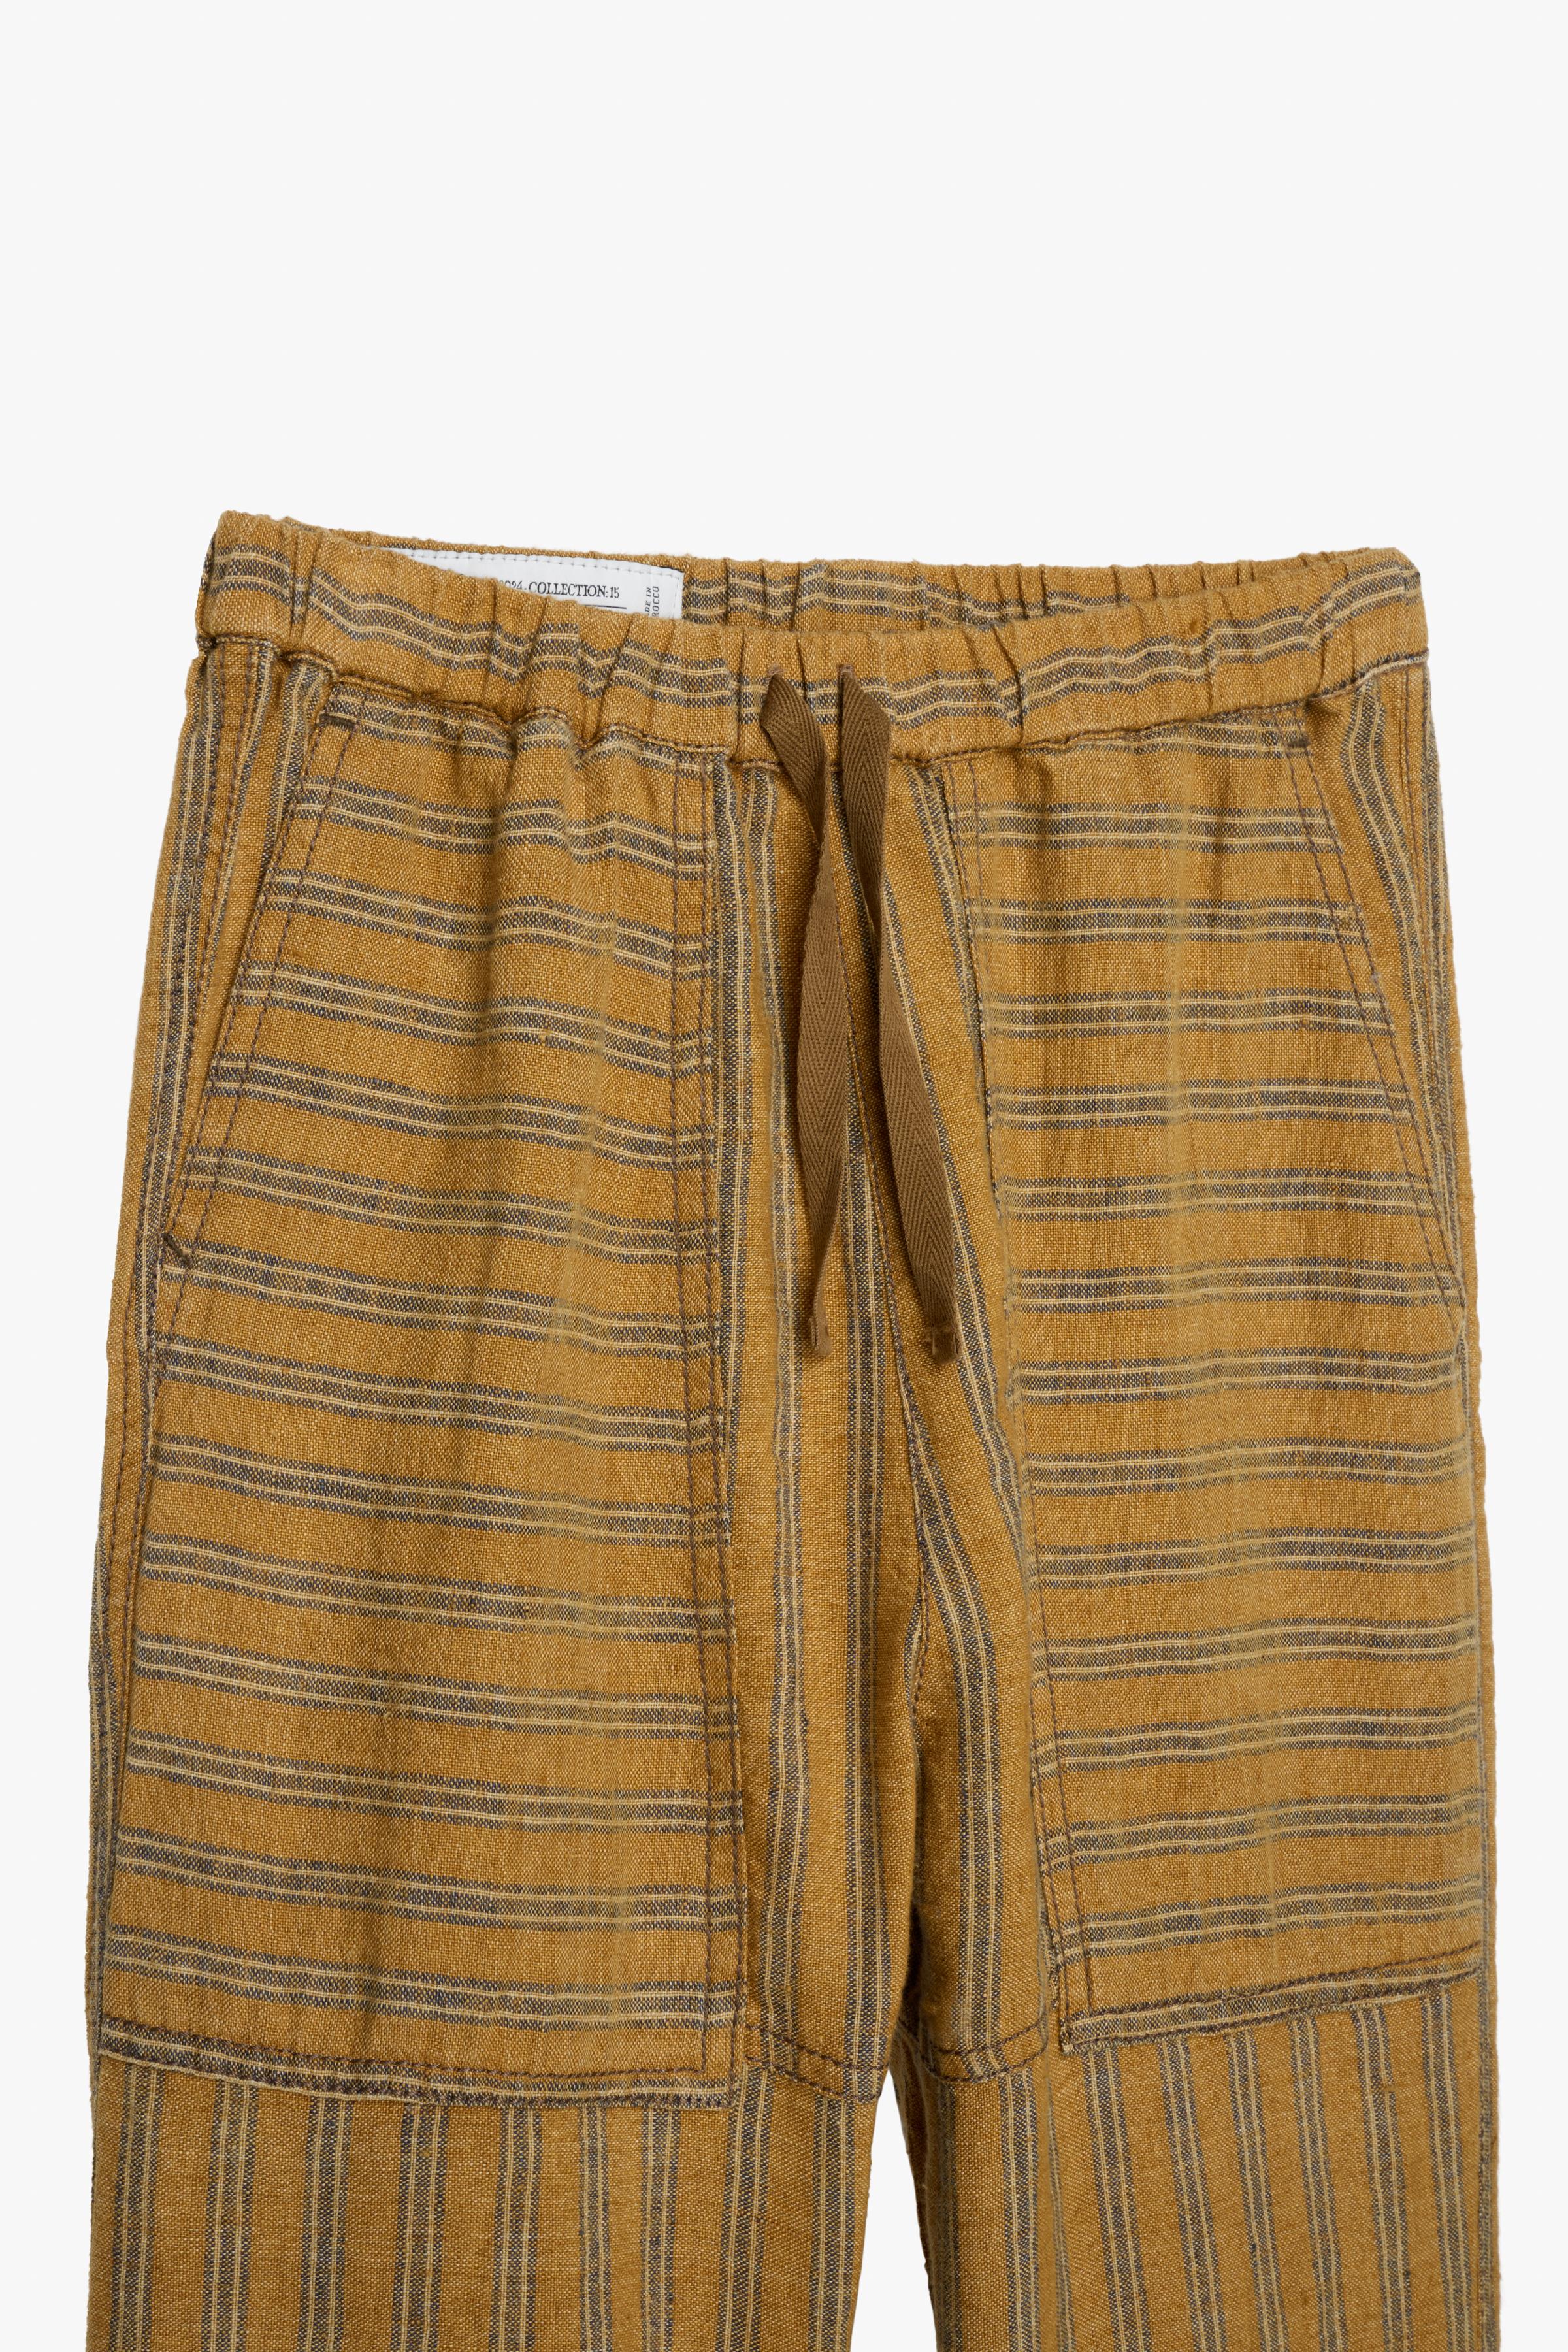 STRIPED LINEN TROUSERS - LIMITED EDITION